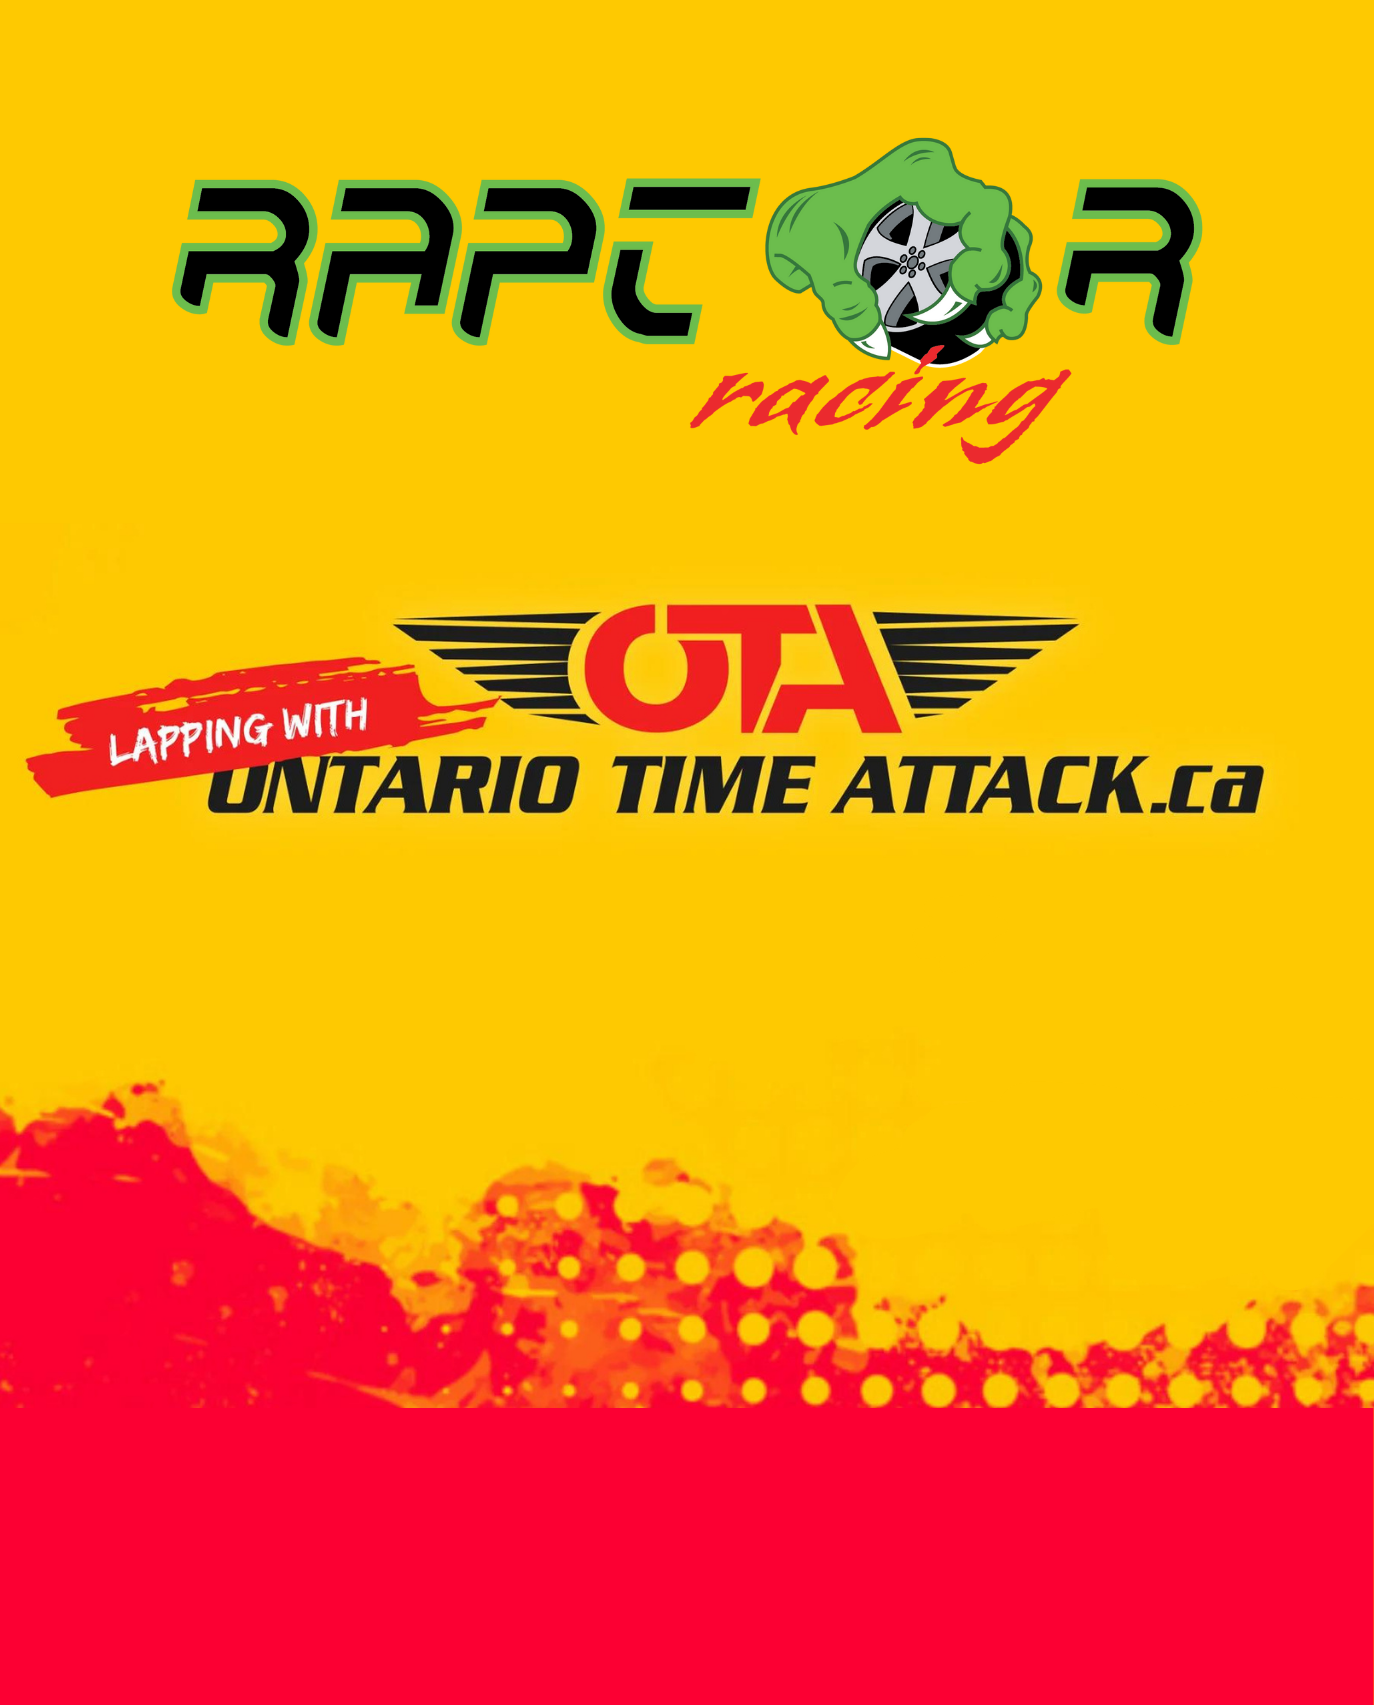 Lapping with OTA at The Raptor Racing Track Day!